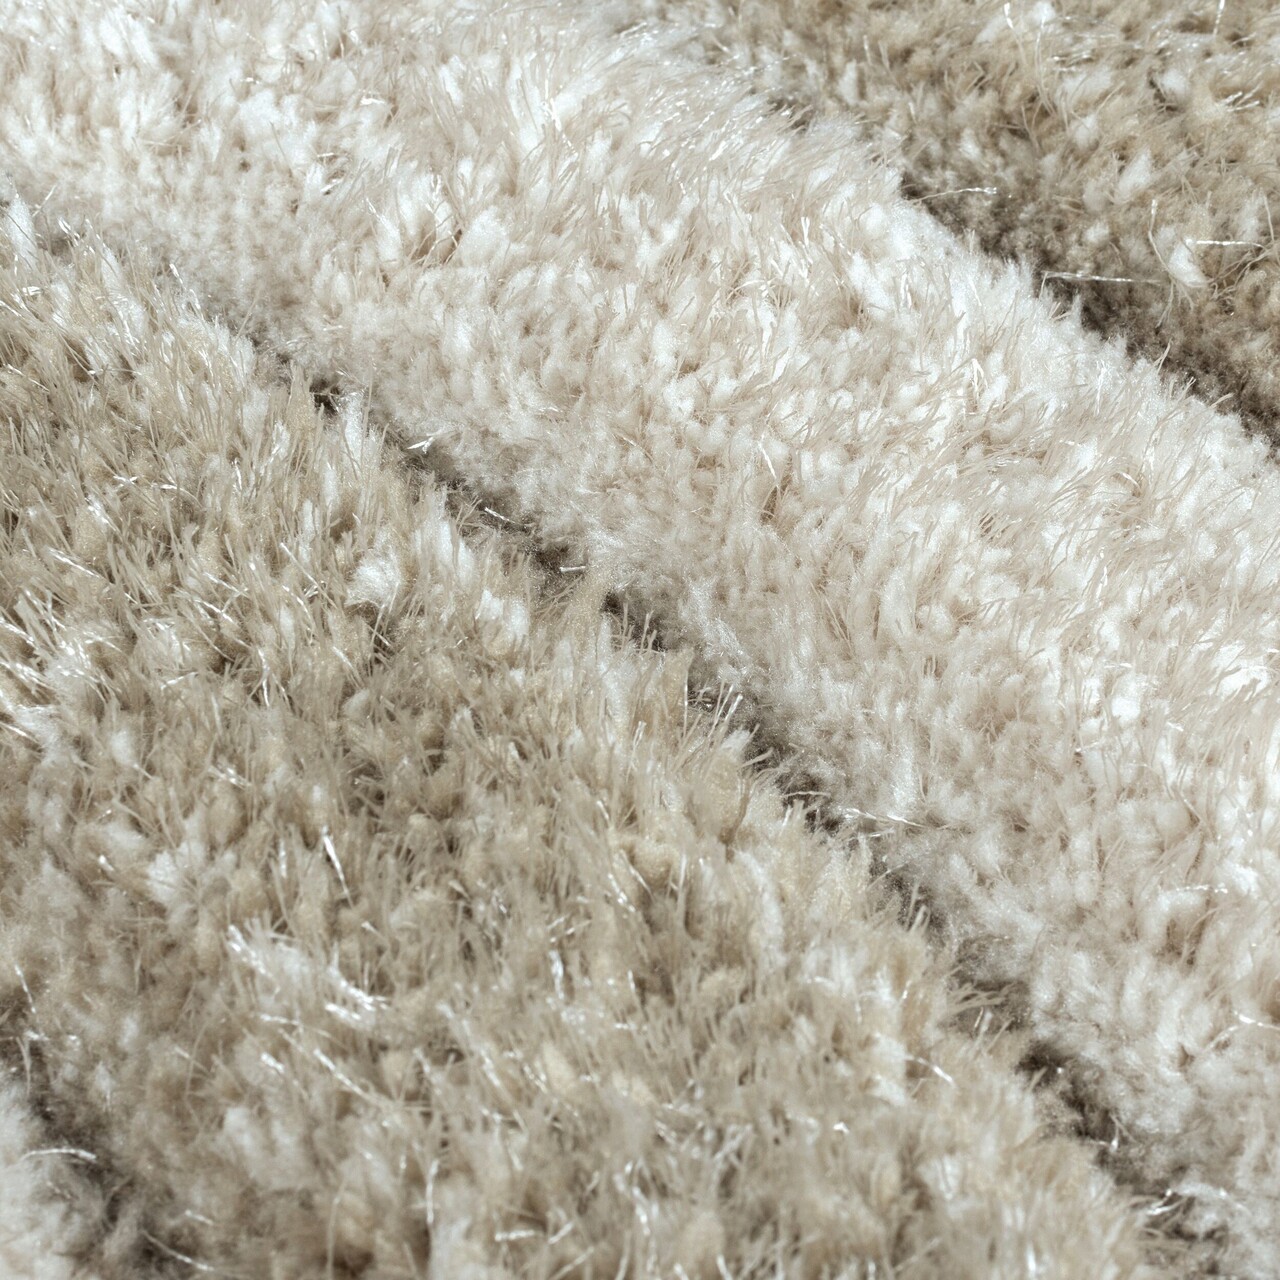 Covor Velvet Carved, Flair Rugs, 120x170 cm, poliester reciclat, natural